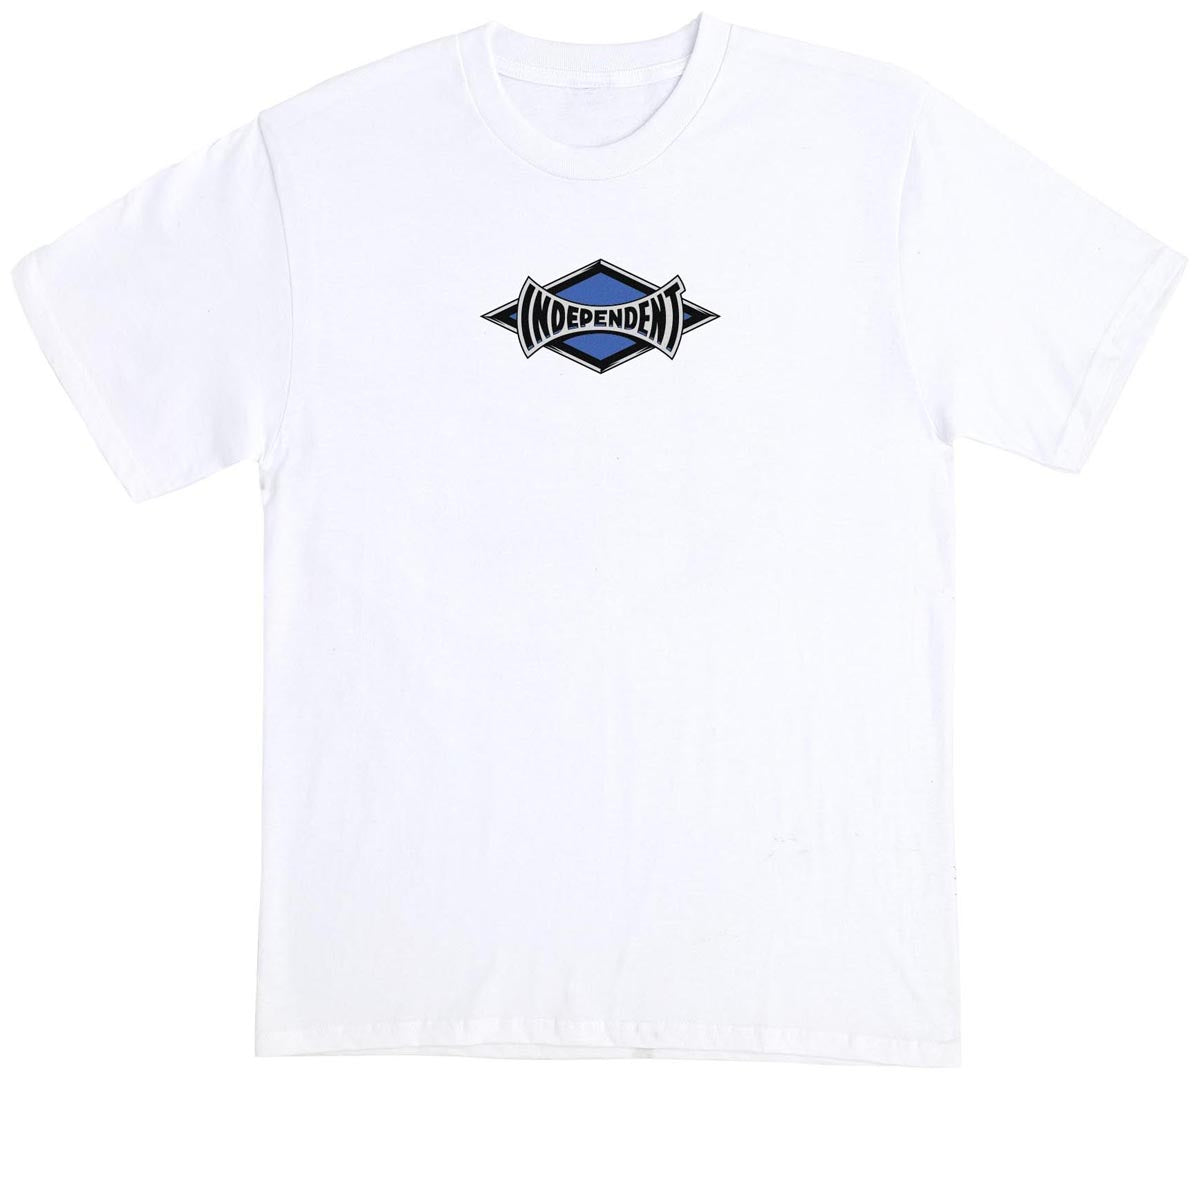 Independent Legacy T-Shirt - White image 2